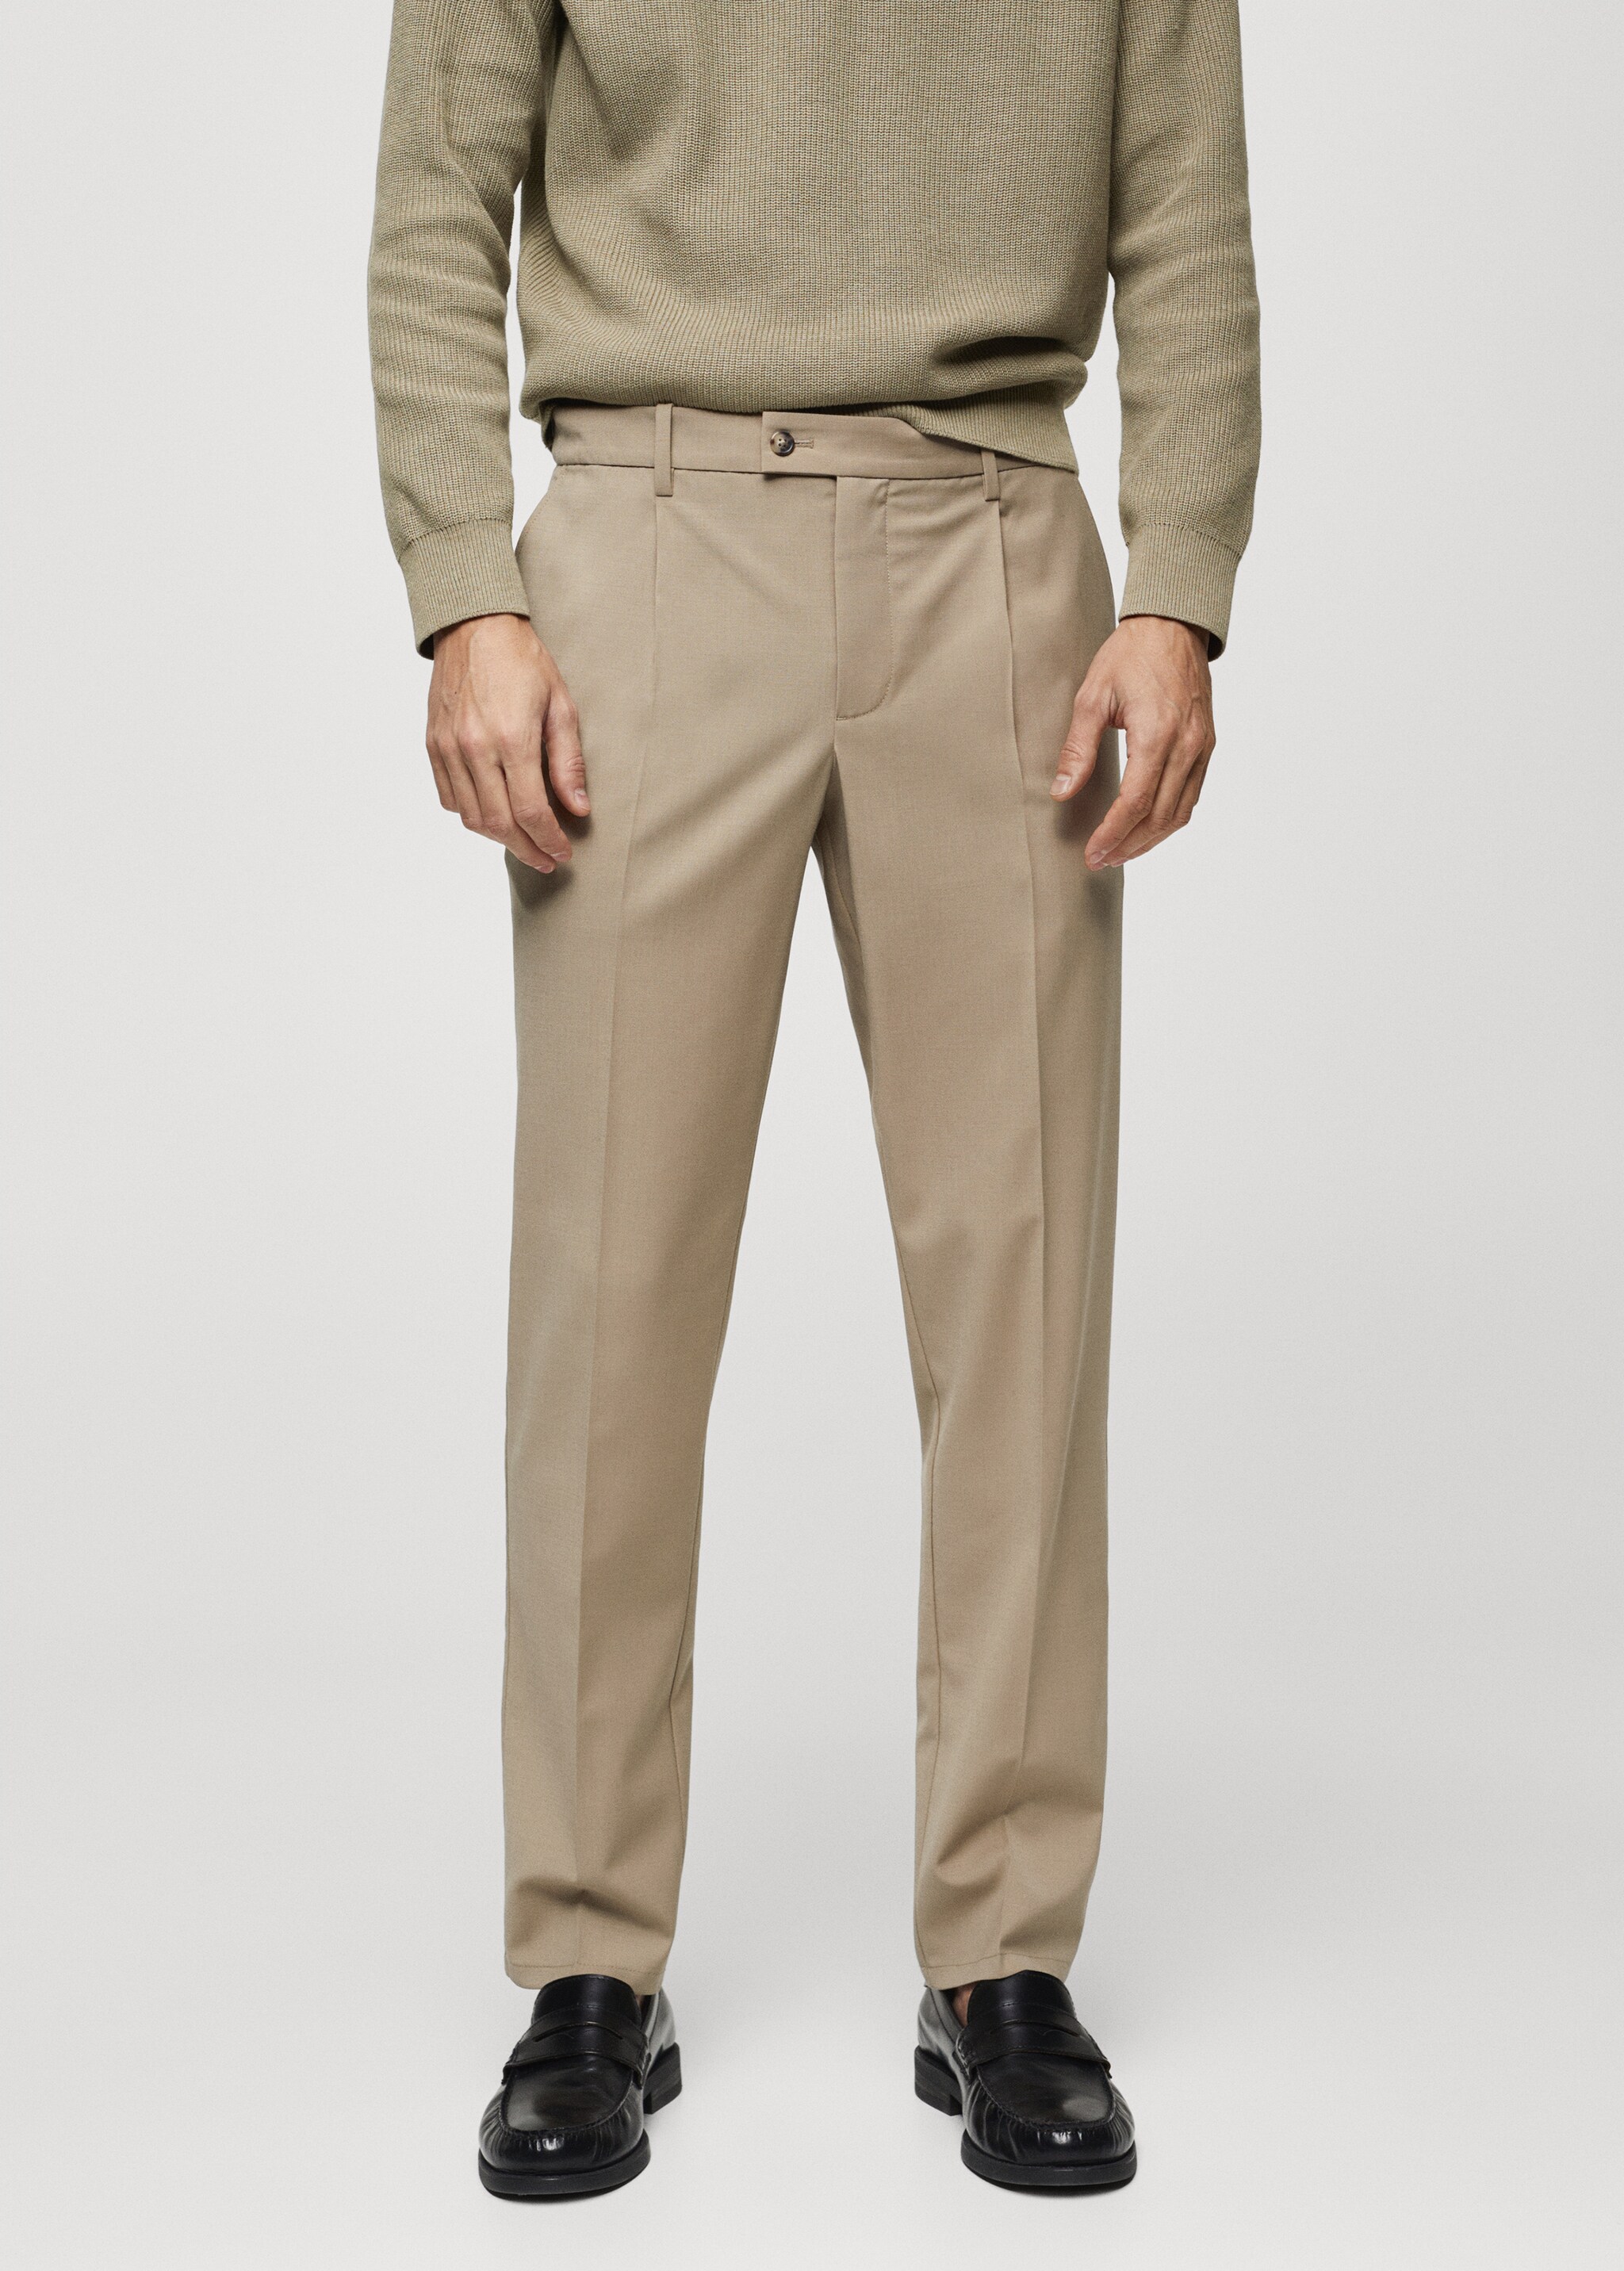 Cold wool trousers with pleat detail - Medium plane